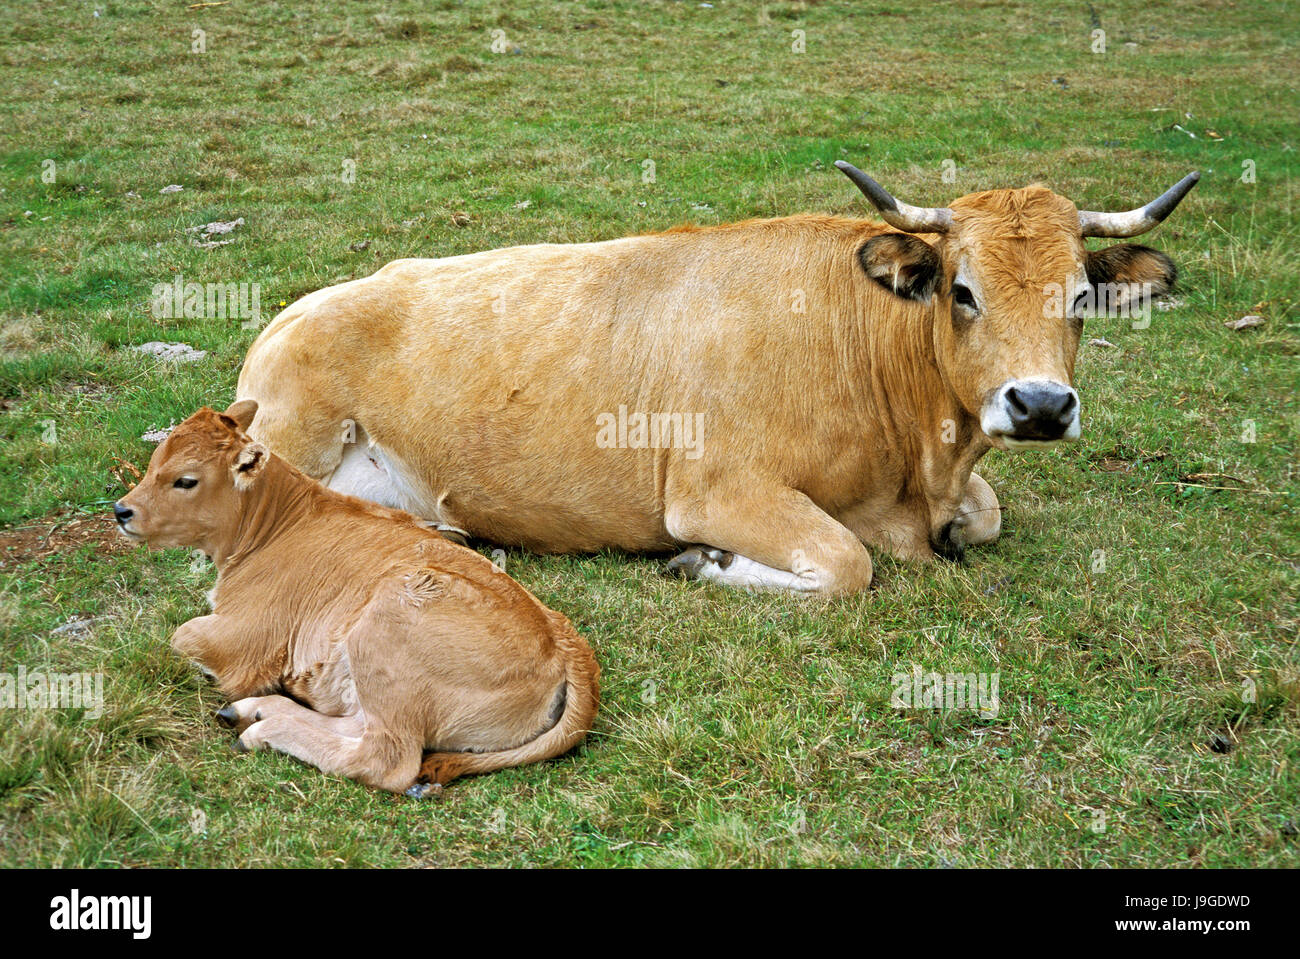 Domestic Cattle, Cow and Calf, Stock Photo